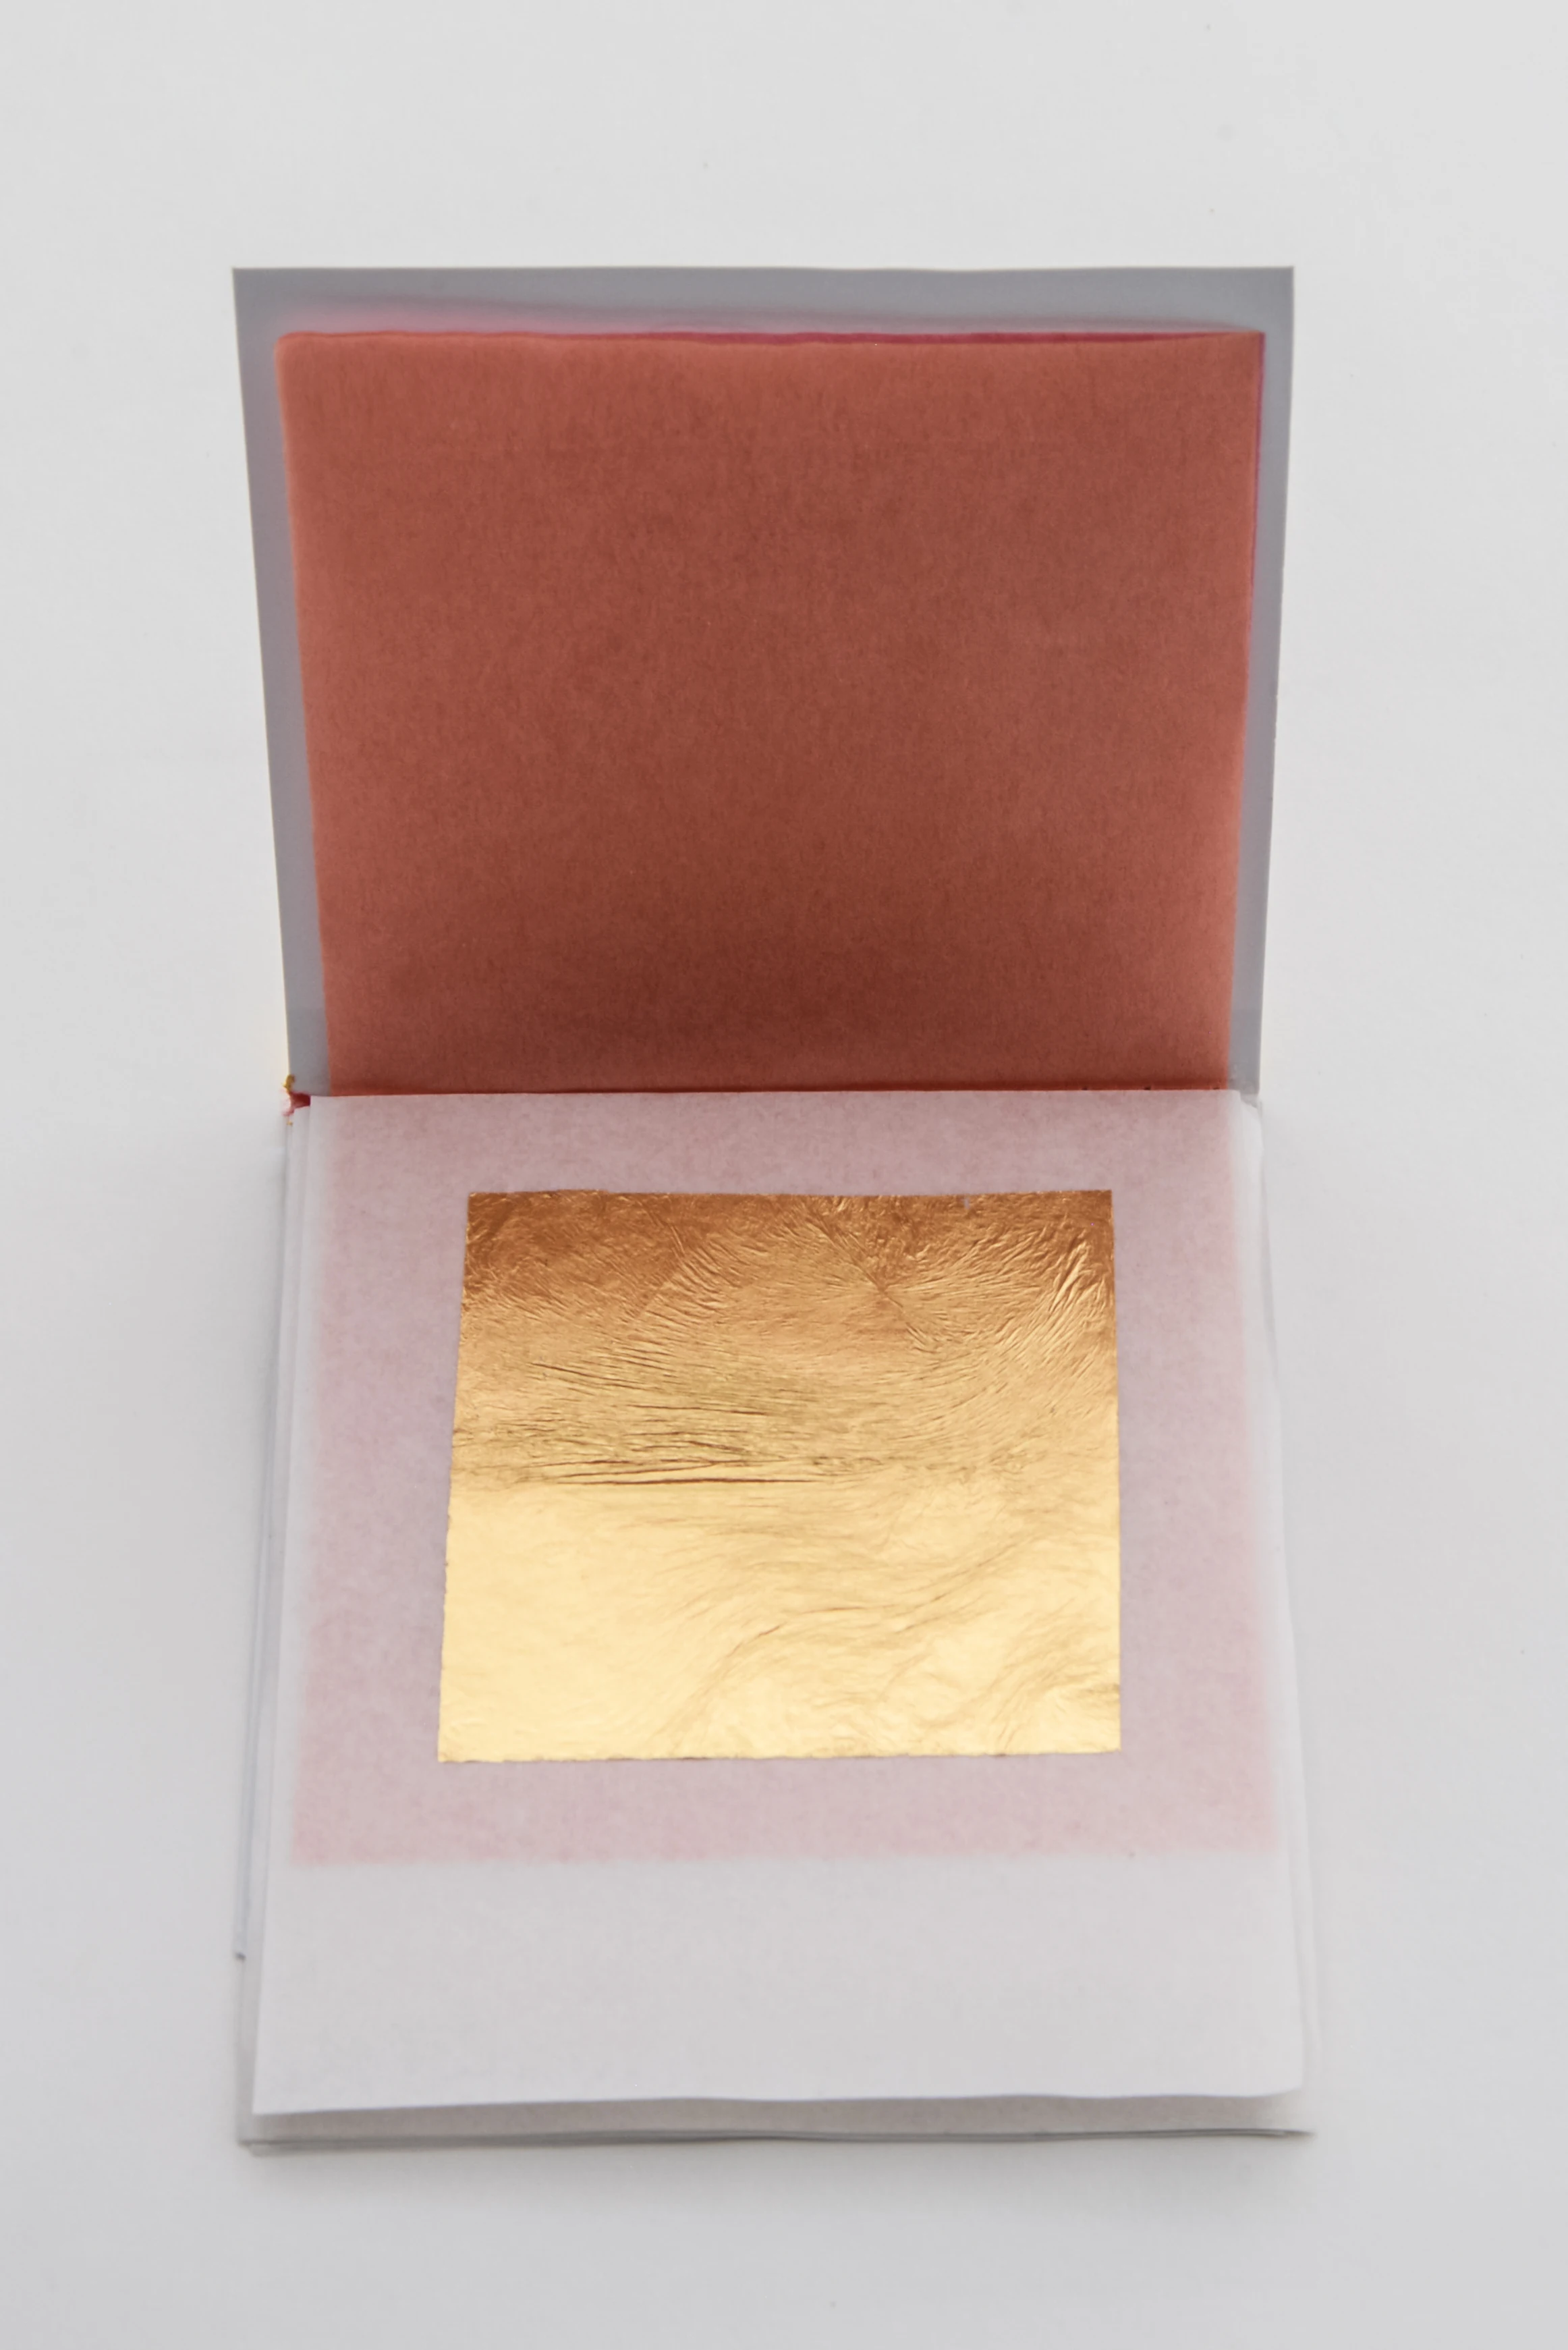 
100 SHEETS 24K 100% PURE GOLD LEAF ANTI WRINKLE AGING FACIAL TREATMENT 